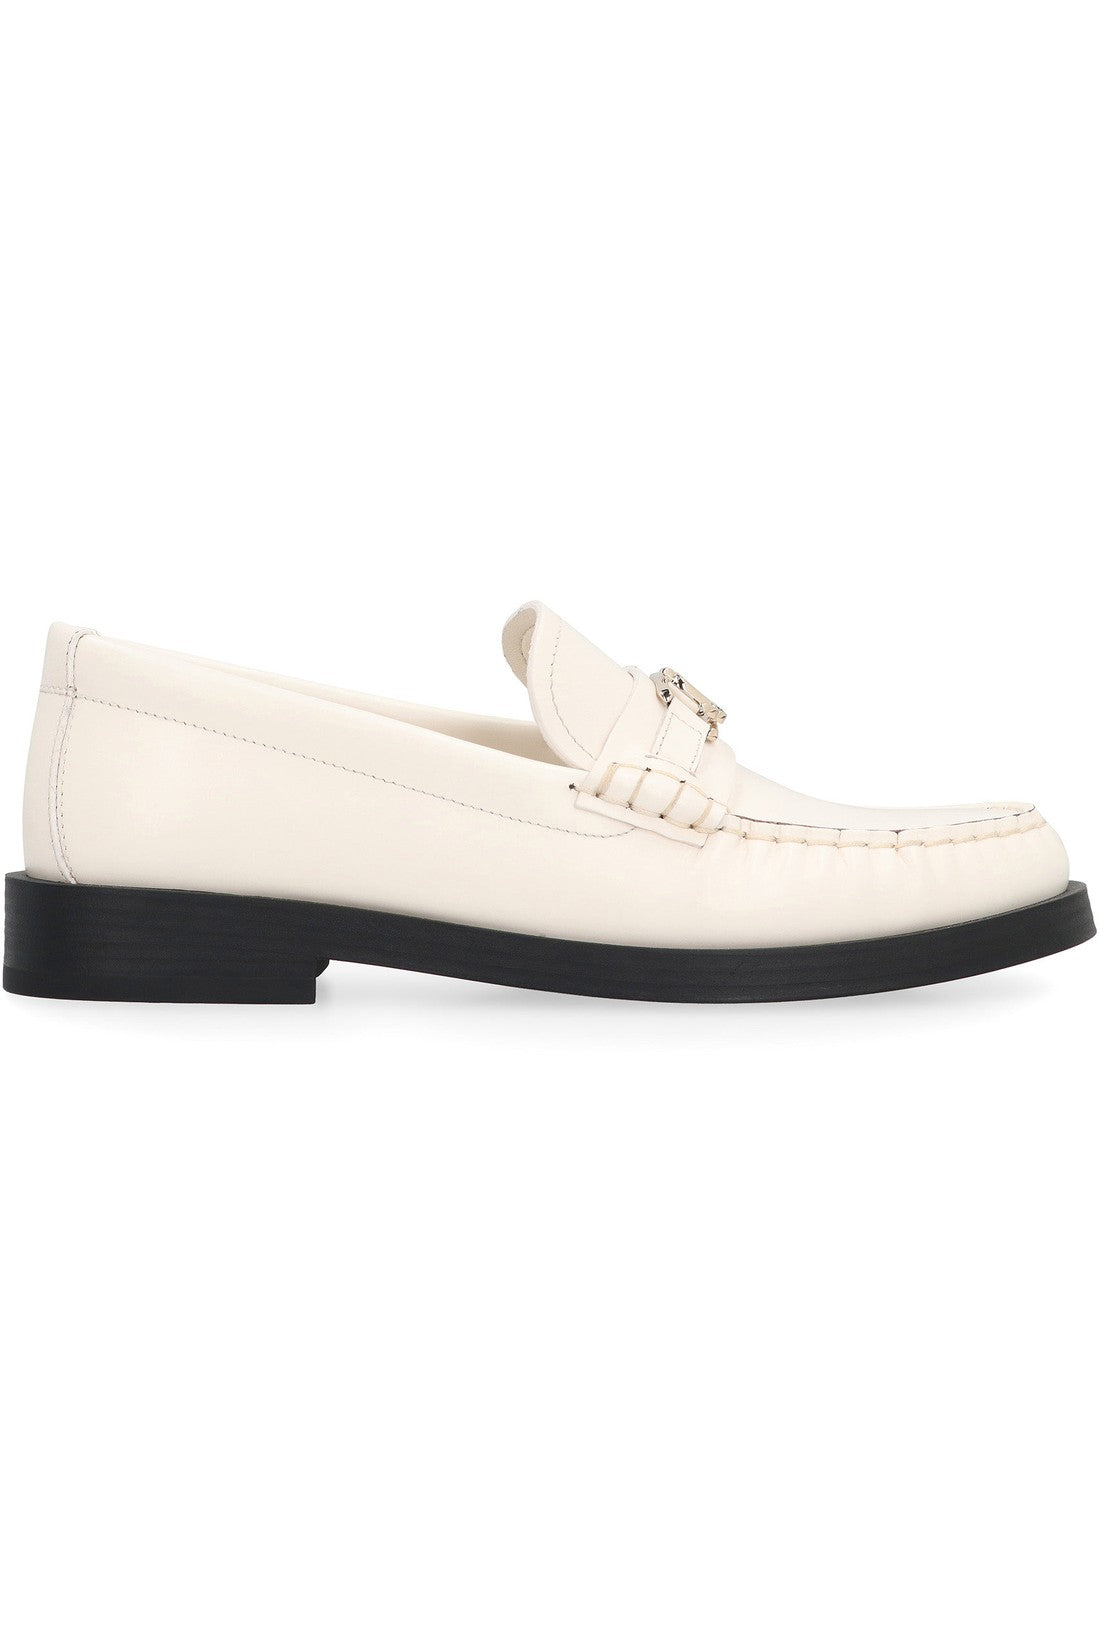 Jimmy Choo-OUTLET-SALE-Addie Leather loafers-ARCHIVIST